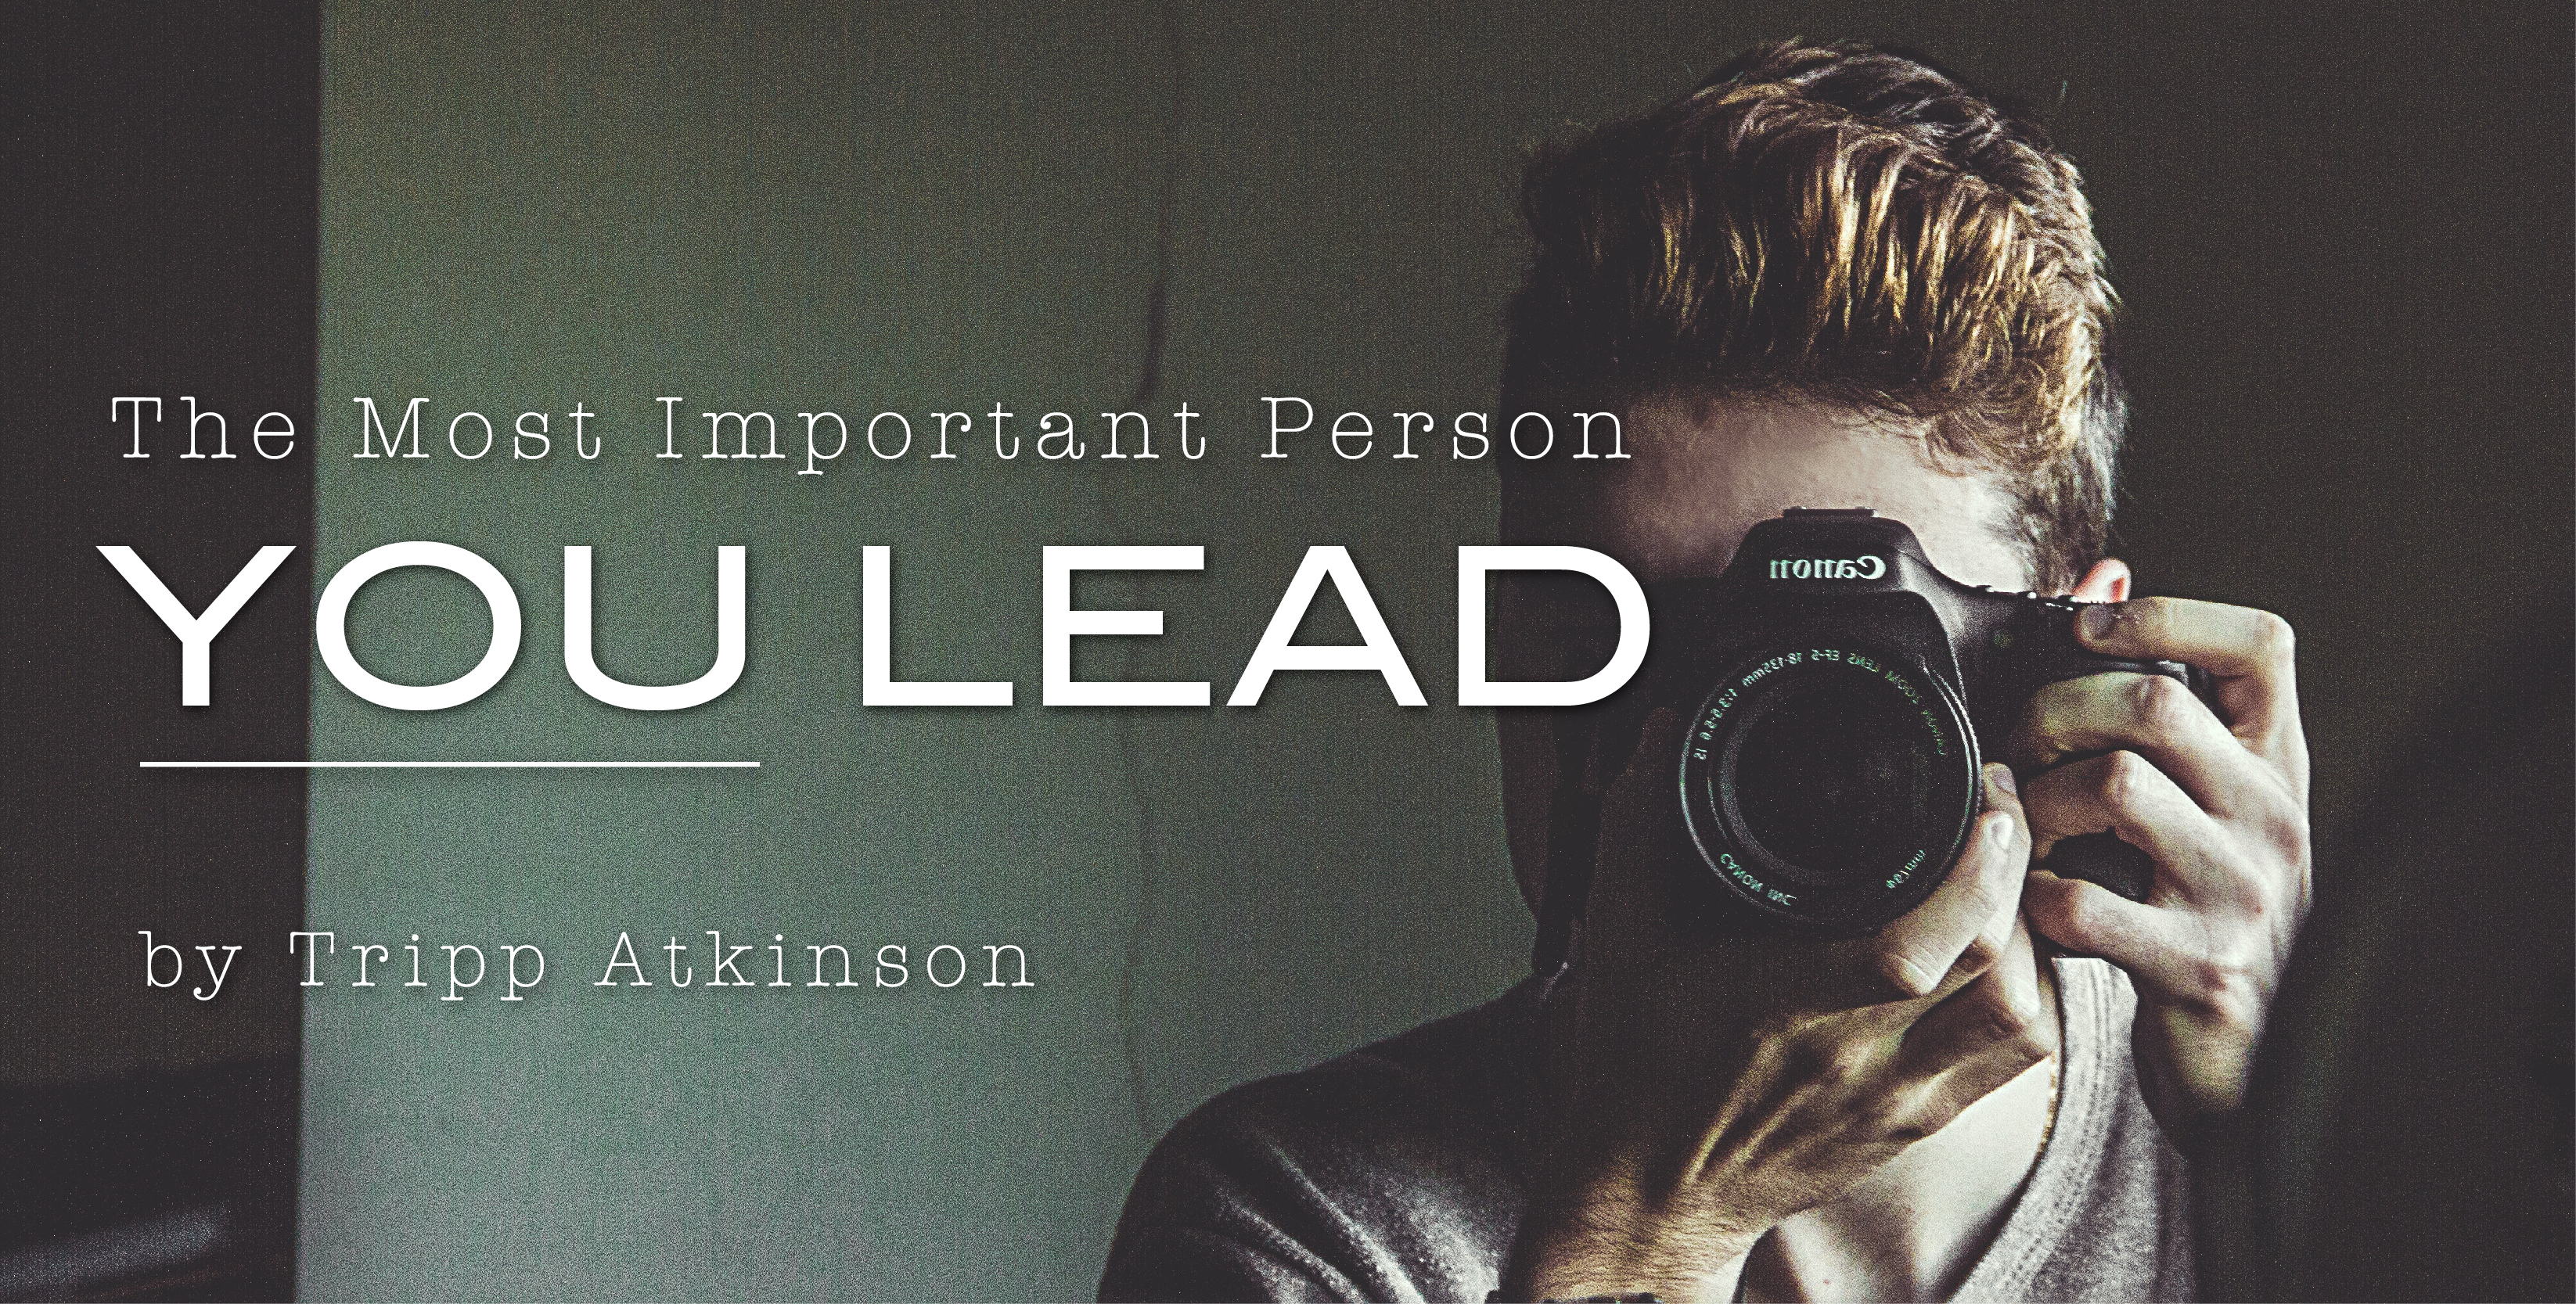 The Most Important Person You Lead blog post by Tripp Atkinson